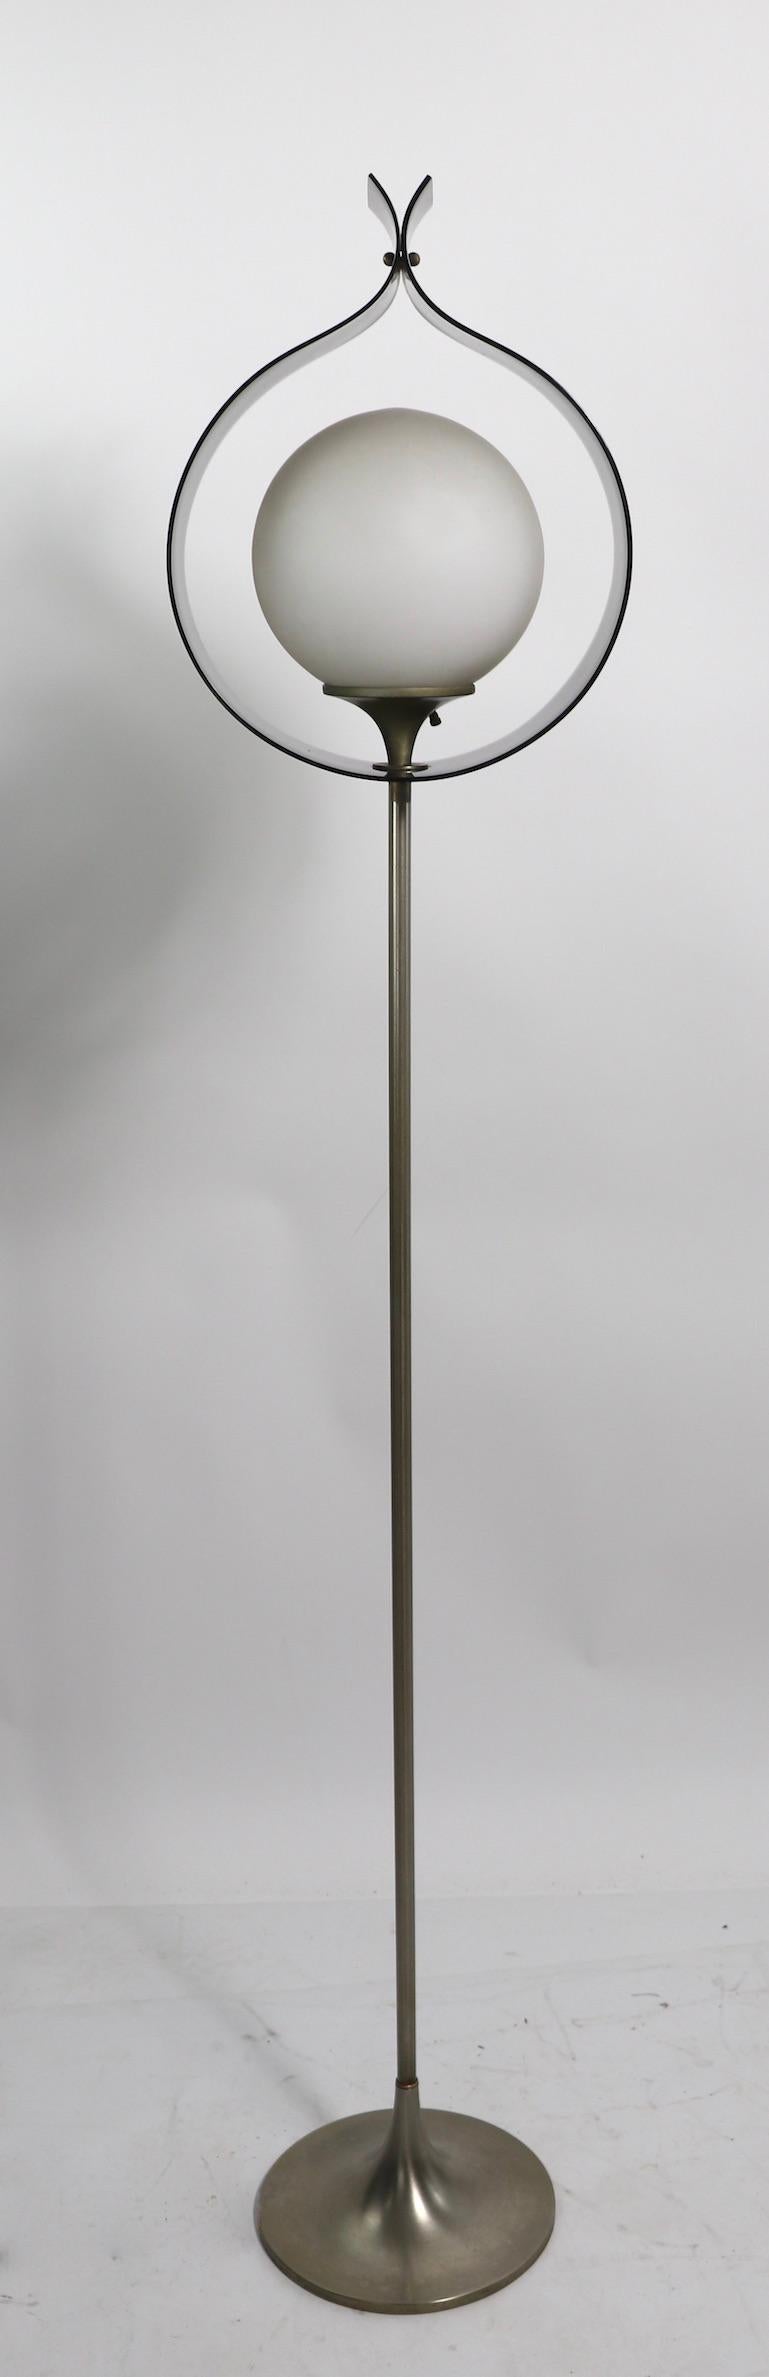 Mod Mid Century Lucite Glass and Metal Floor Lamp by Laurel For Sale 1